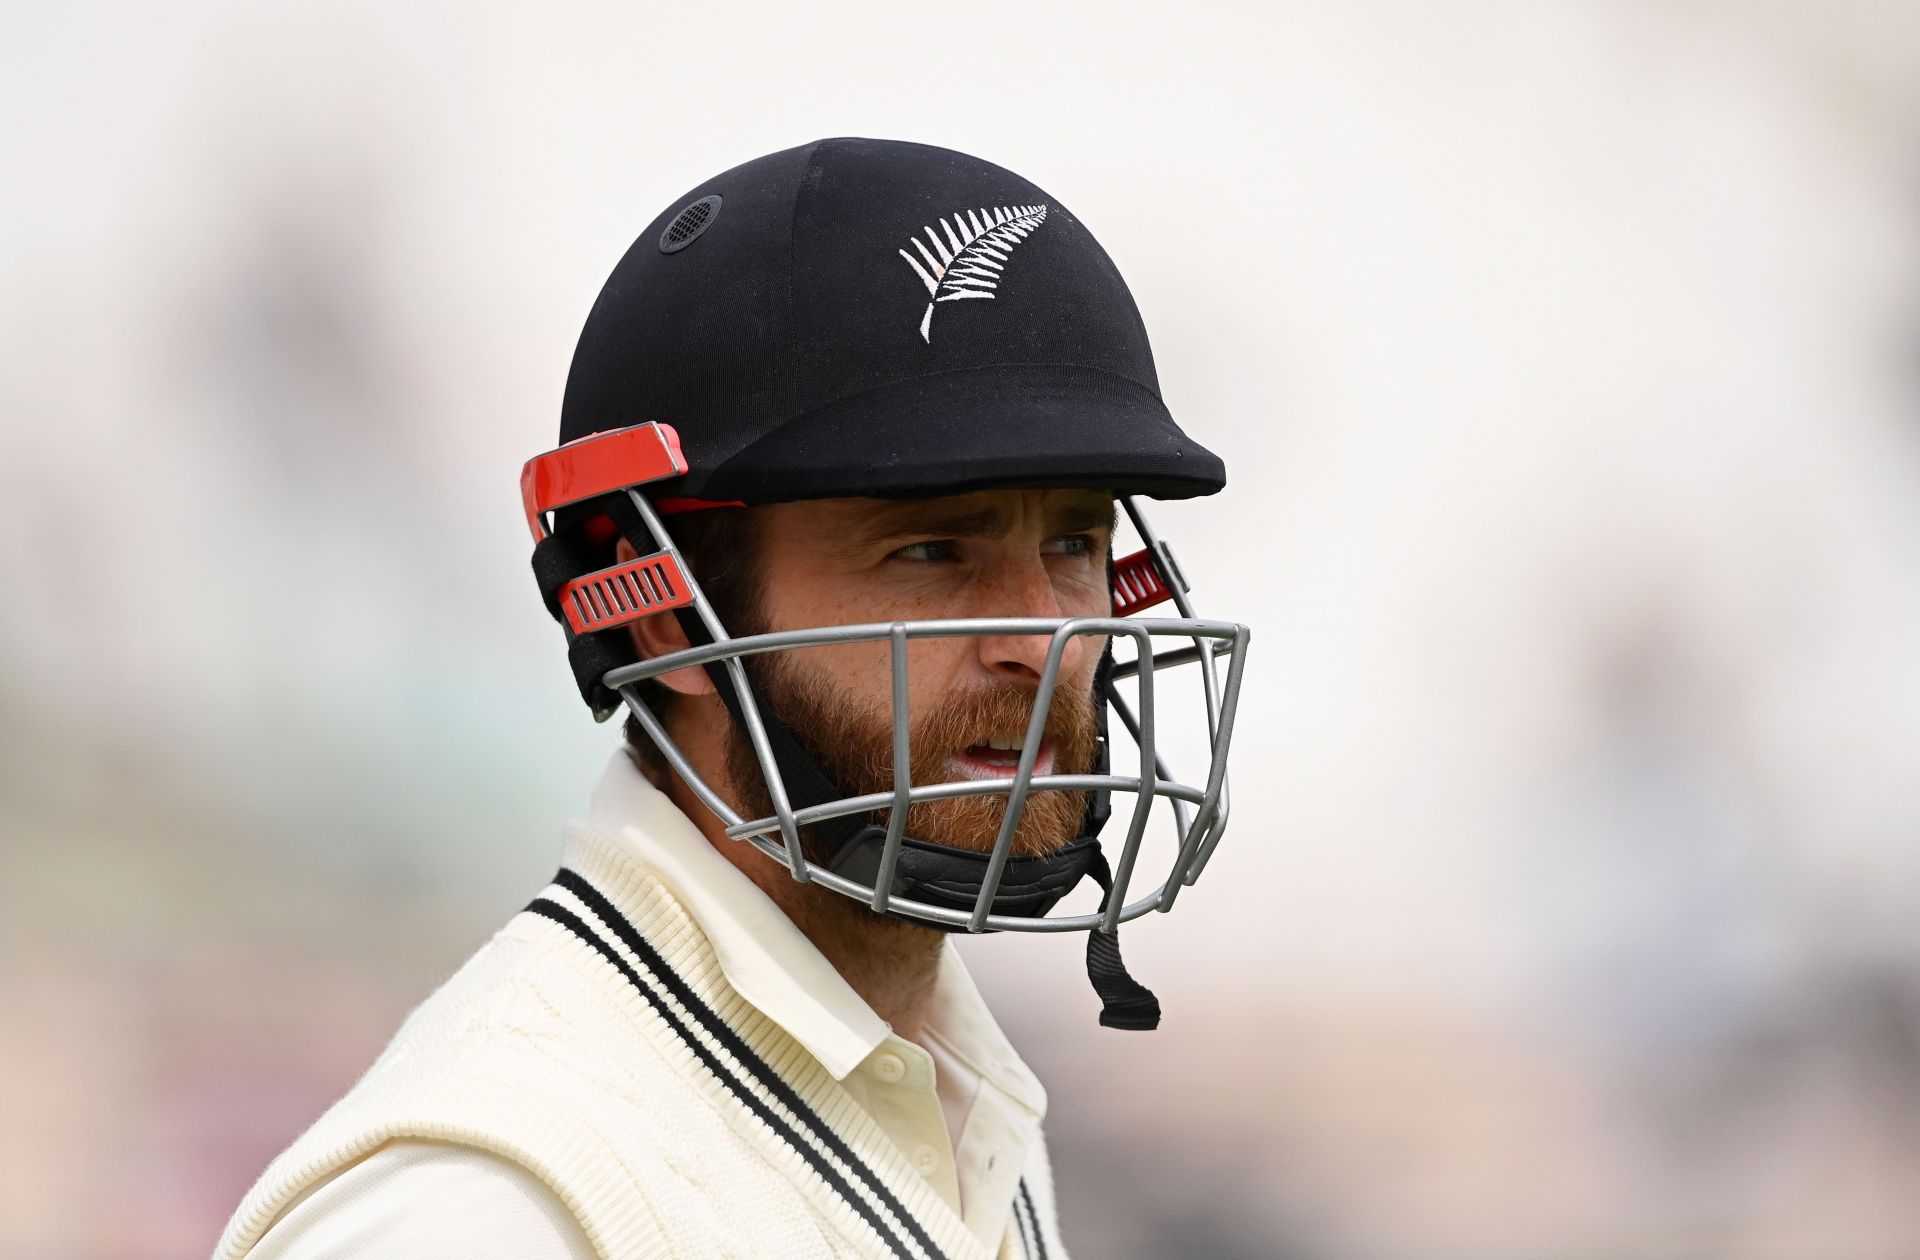 ICC World Test Championship Final: Kane Williamson was instrumental with the bat against India